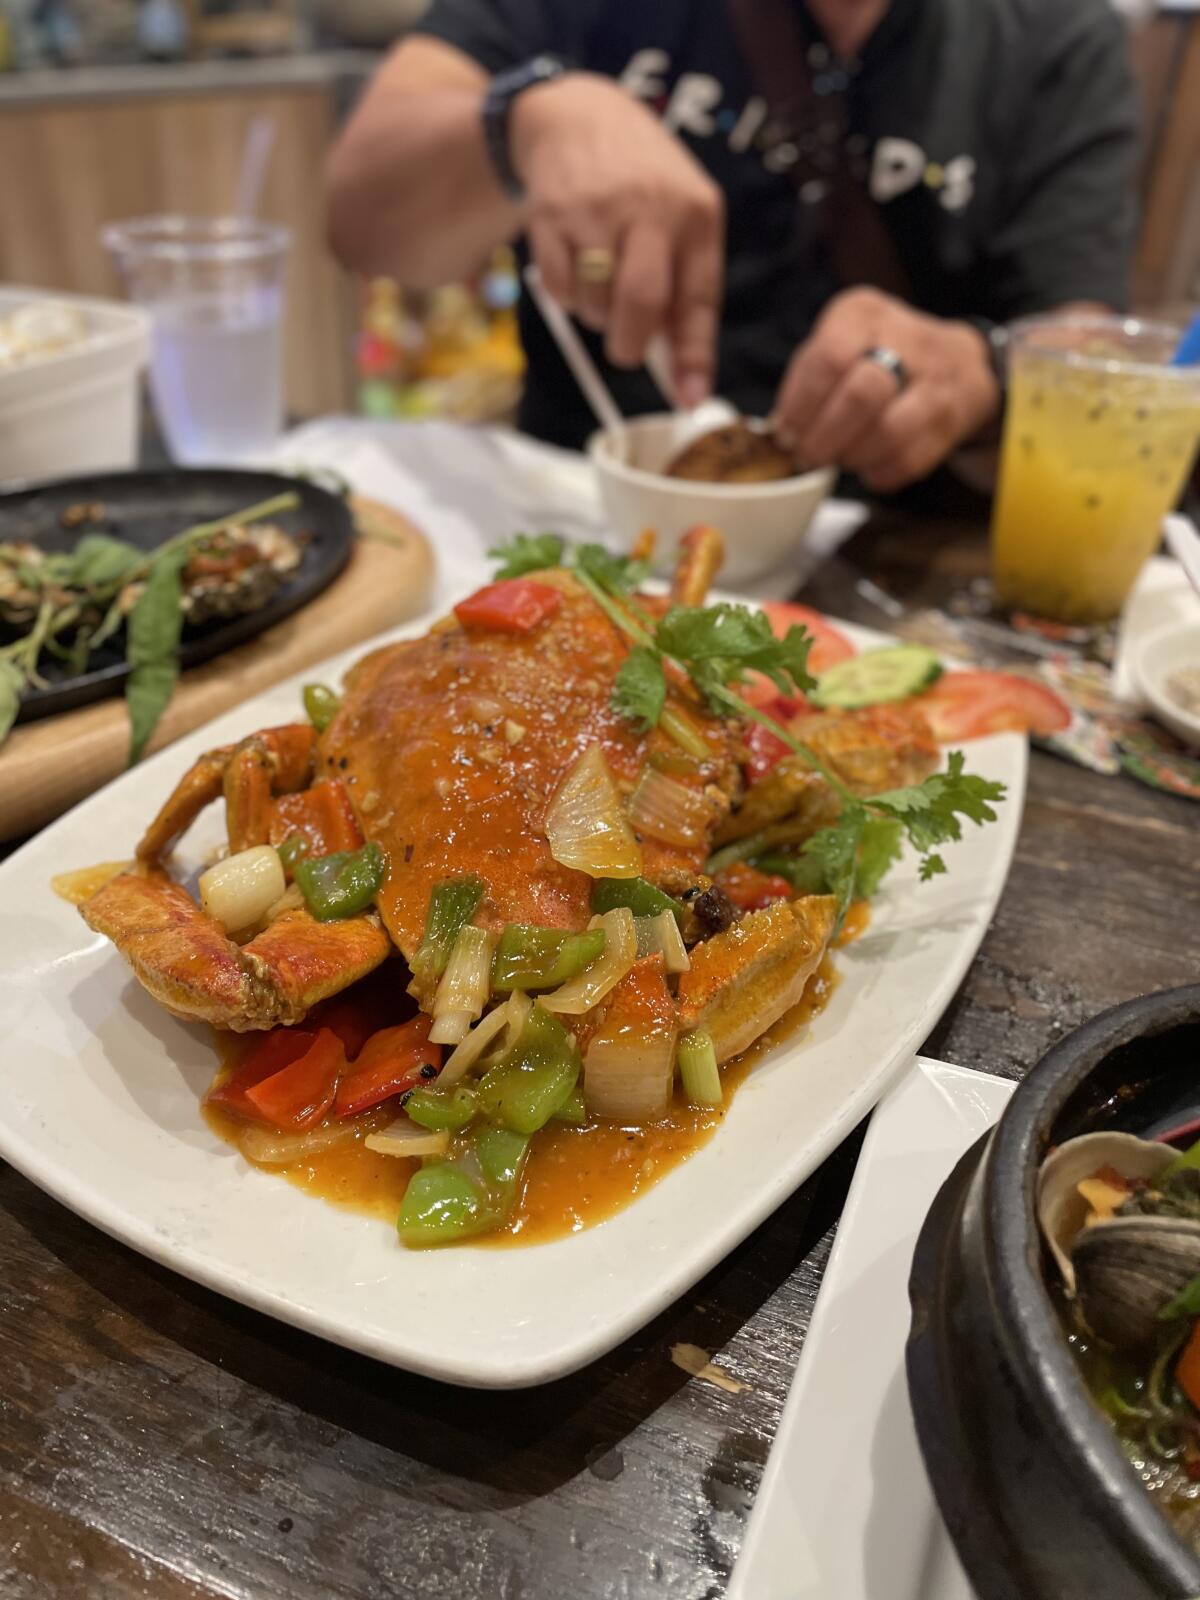 The House Special Crab at Oc & Lau will inspire oohs-and-aahs like nothing else.